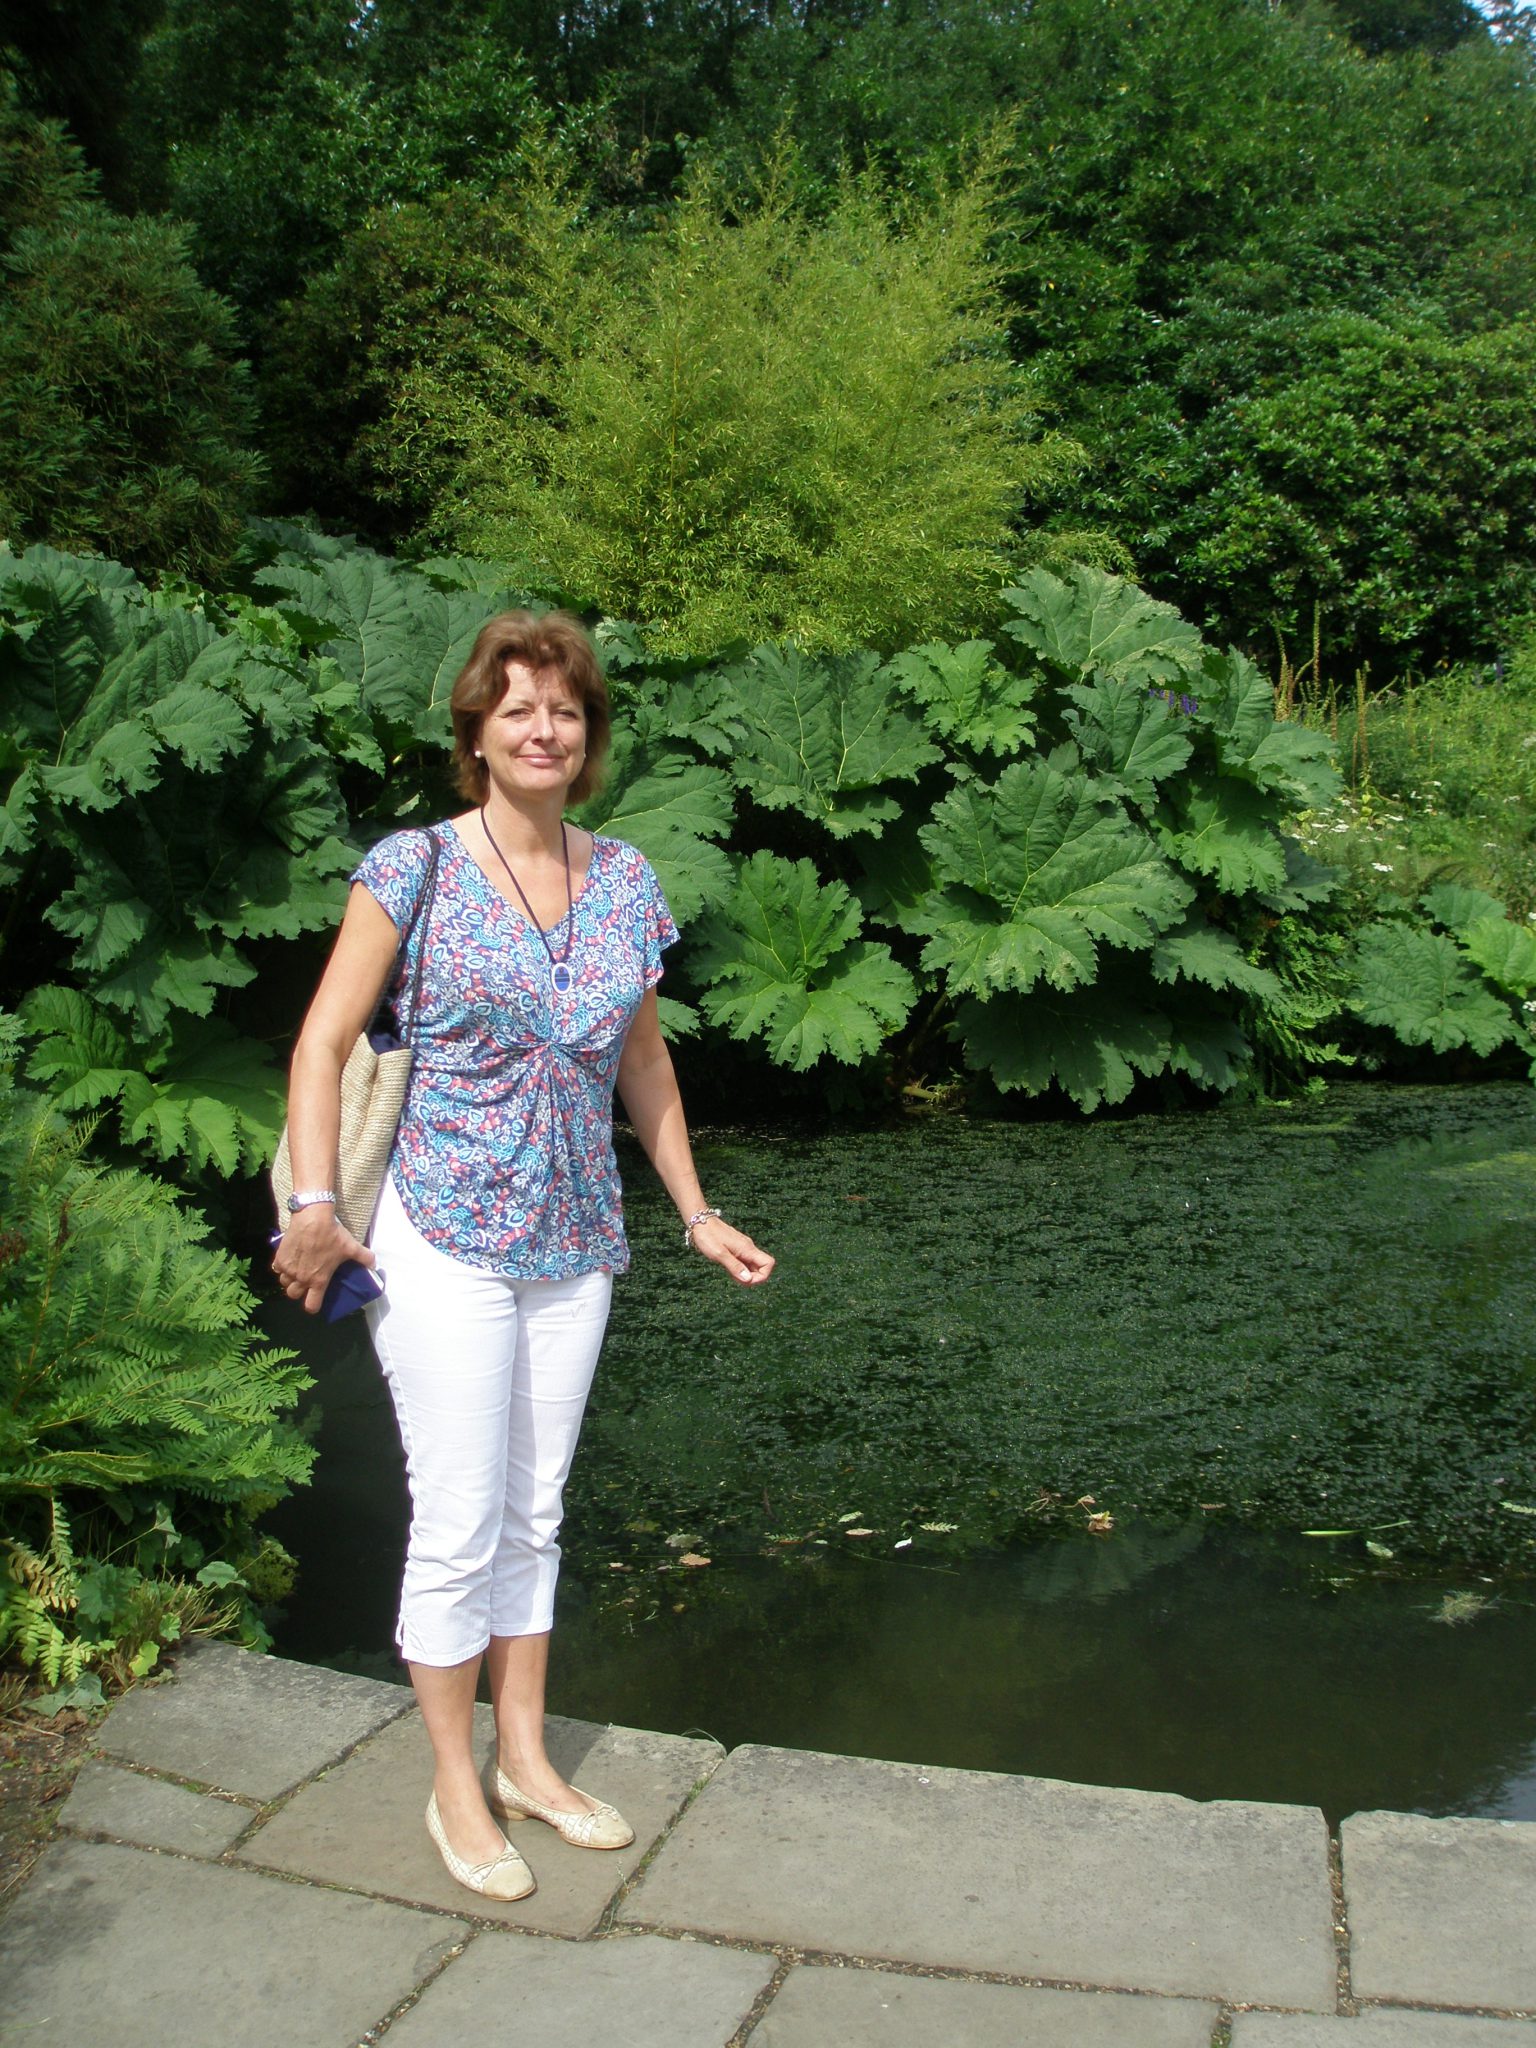 Guide Extraordinaire: Amanda Hutchinson, by Winston Churchill's koi-pond, at Chartwell, on August 5, 2013.